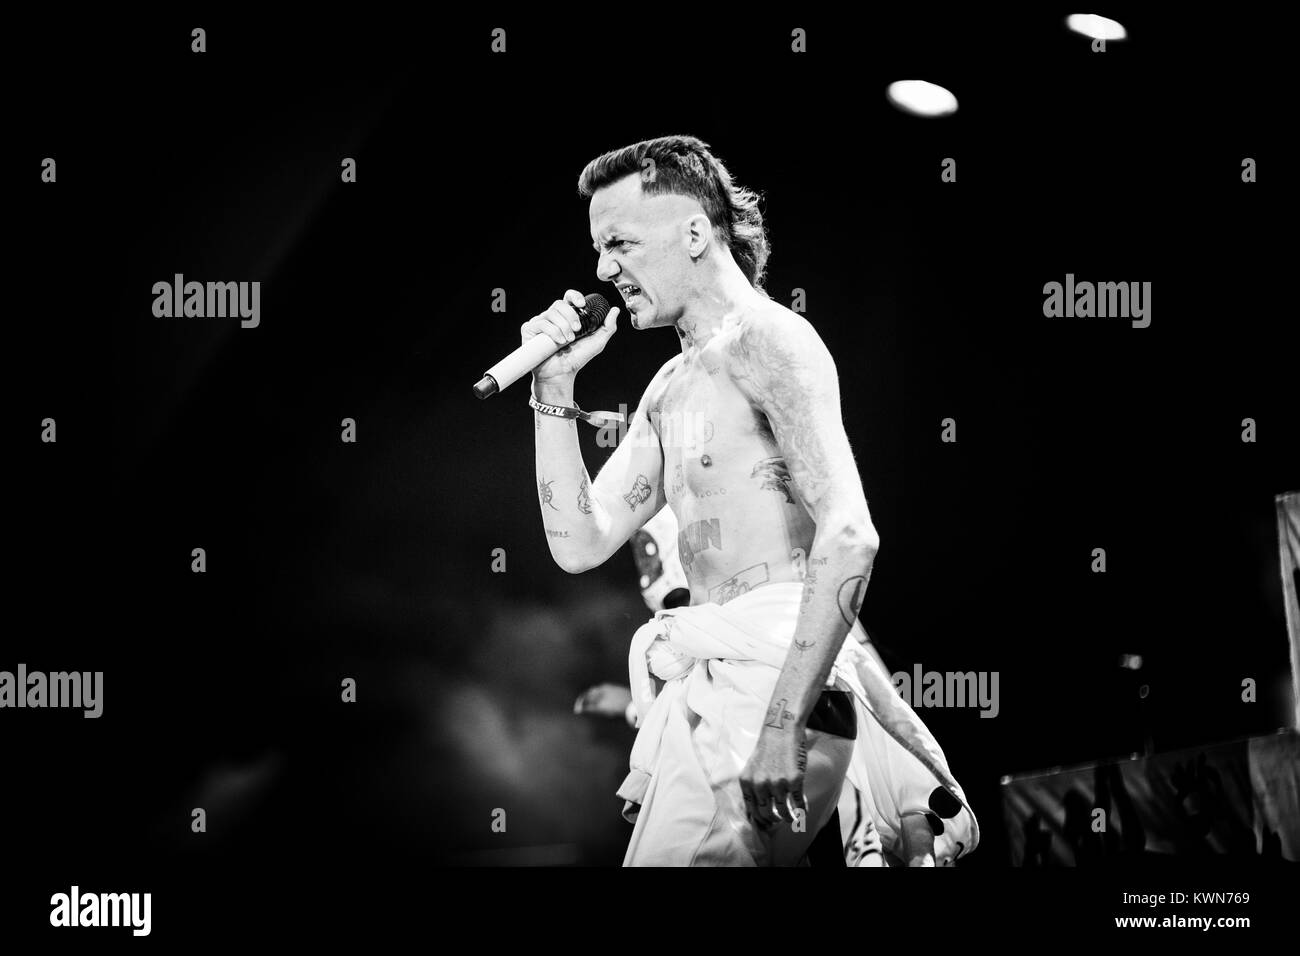 The South African rap duo Die Antwoord performs a live concert at Orange Stage at the Danish music festival Roskilde Festival 2015. The duo consists of the two rave-vocalist Ninja (pictured) and YoLandi Visser who perform lyrics in Afrikaans, Xhosa and English. Denmark, 03/07 2015. Stock Photo